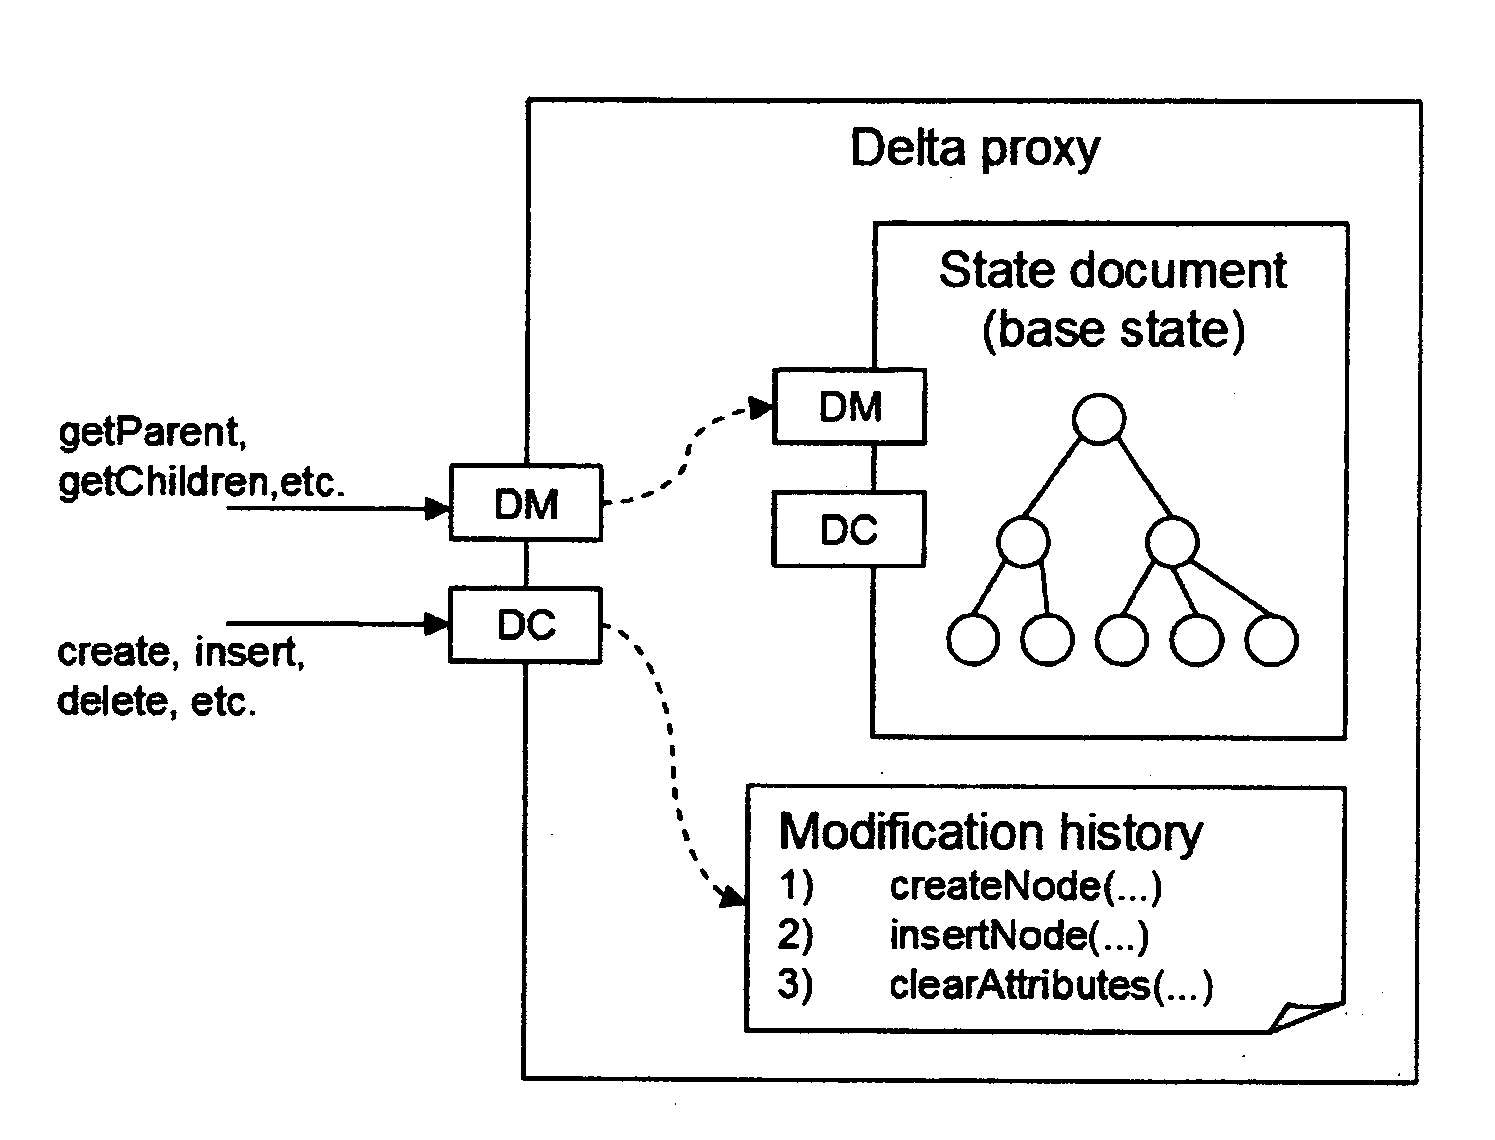 Method and system for efficiently handling navigational state in a portal